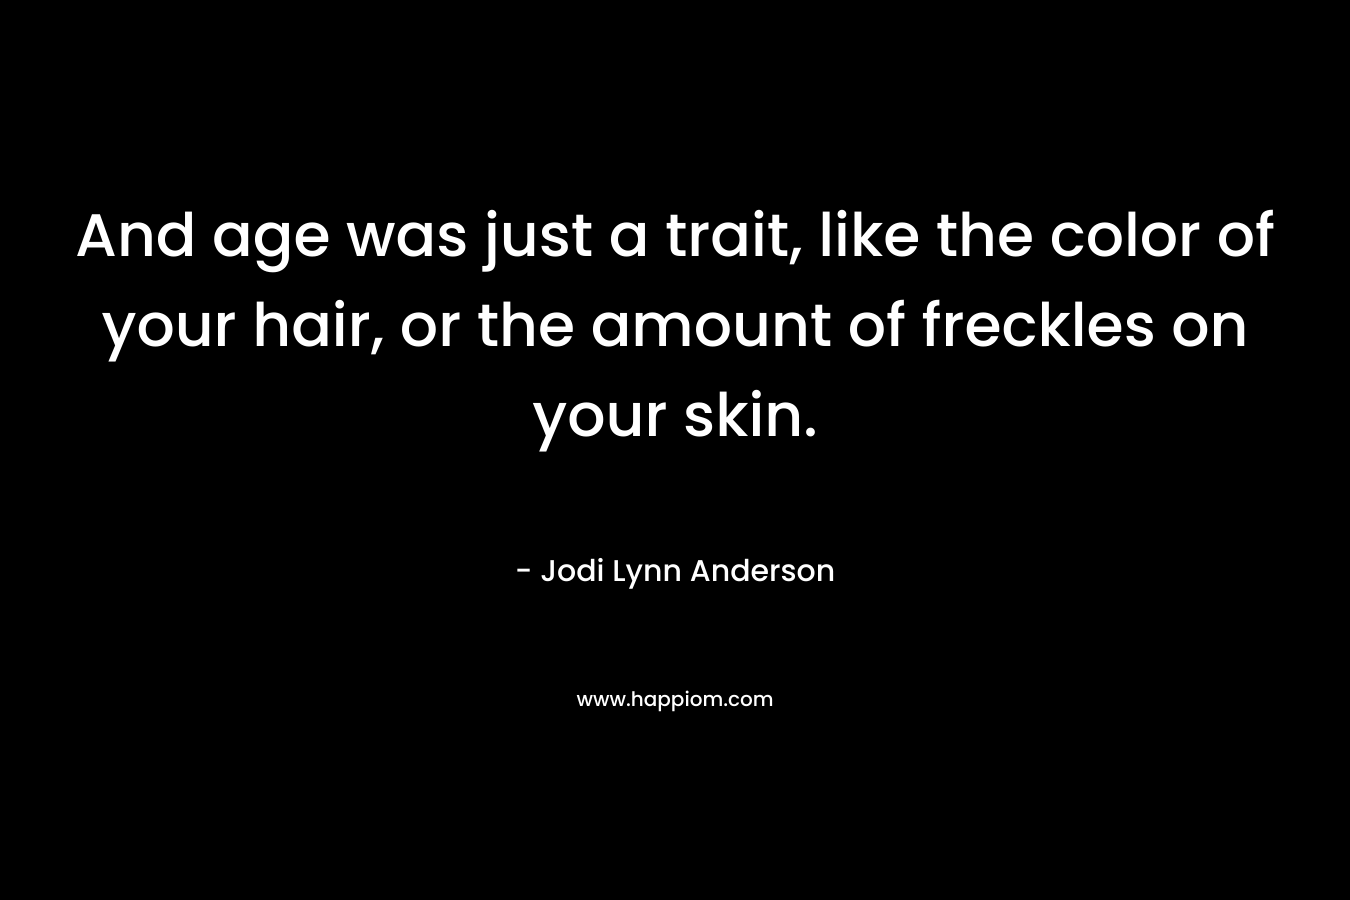 And age was just a trait, like the color of your hair, or the amount of freckles on your skin.